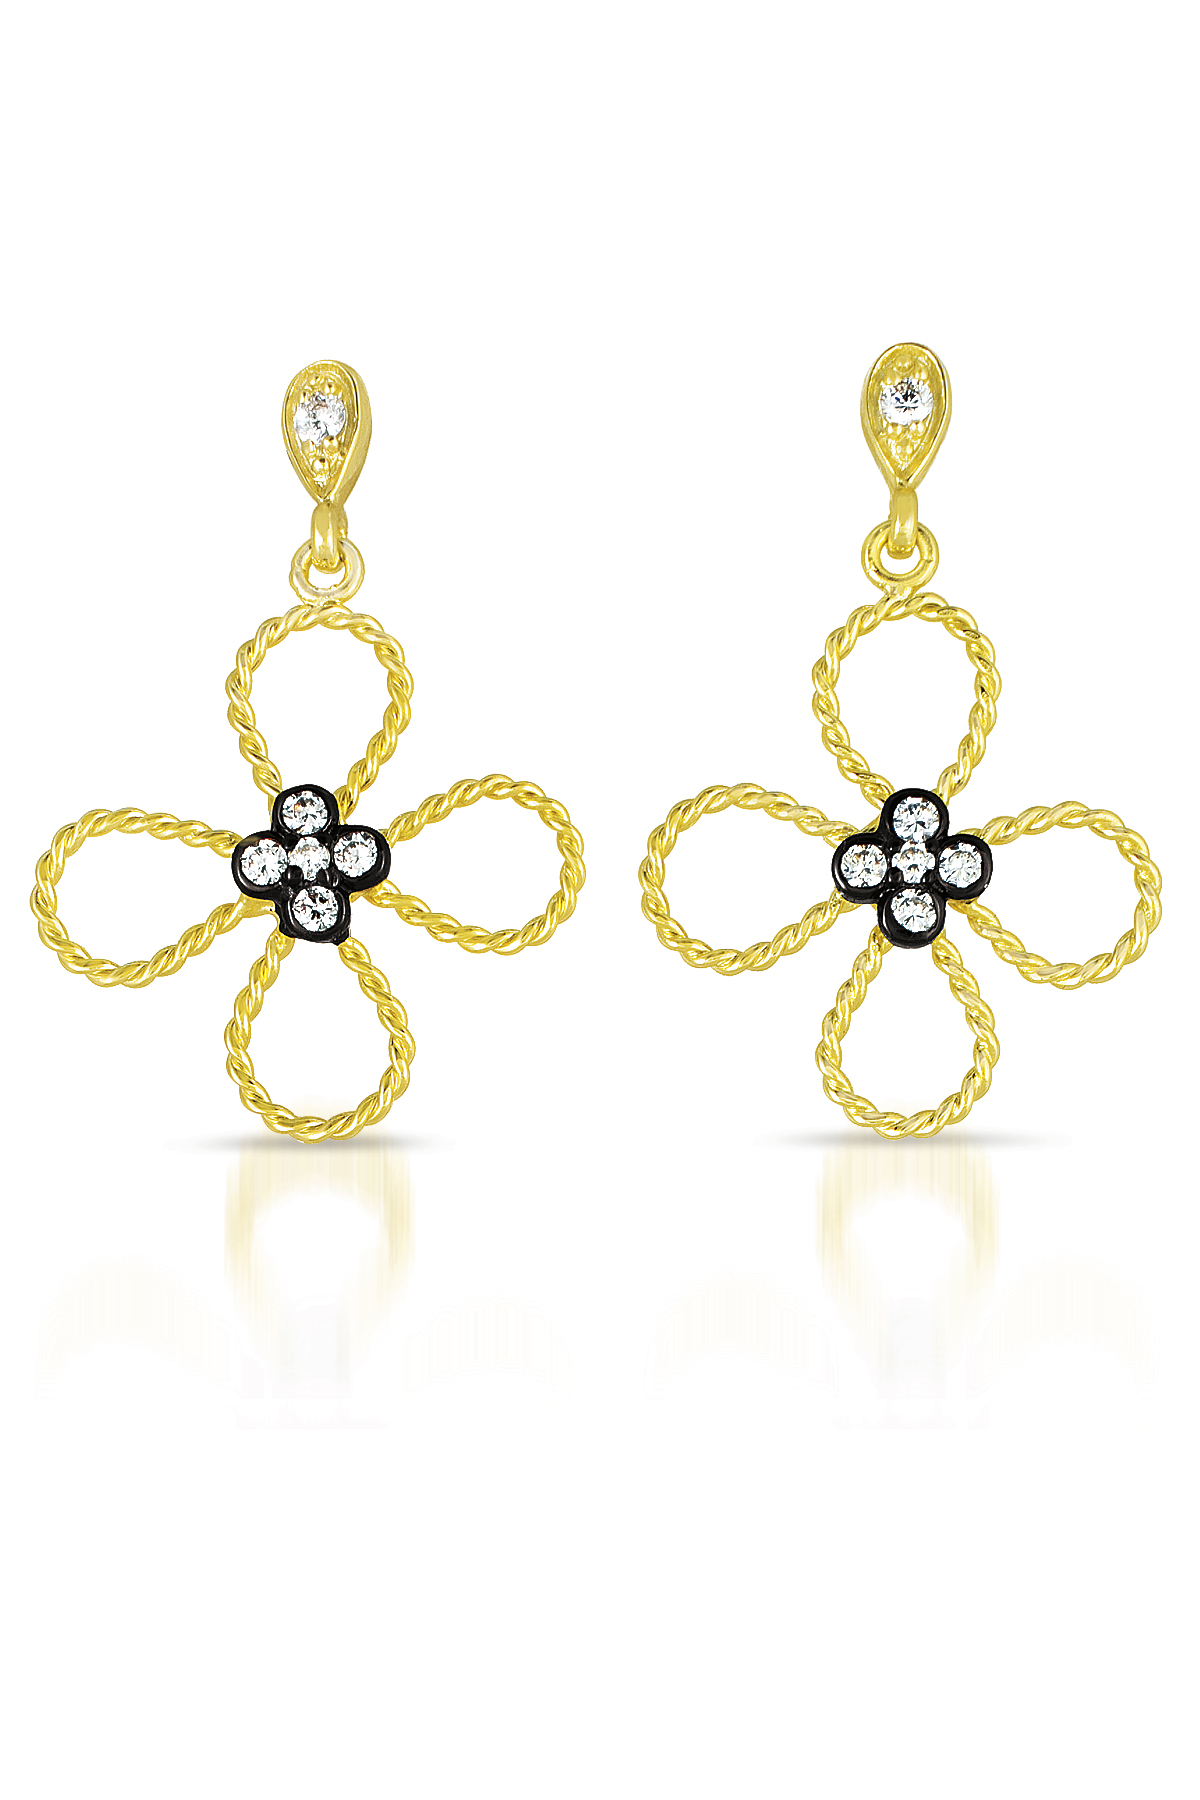 Cubic Zirconia (.925) Sterling Silver Black And Gold Flower Earrings